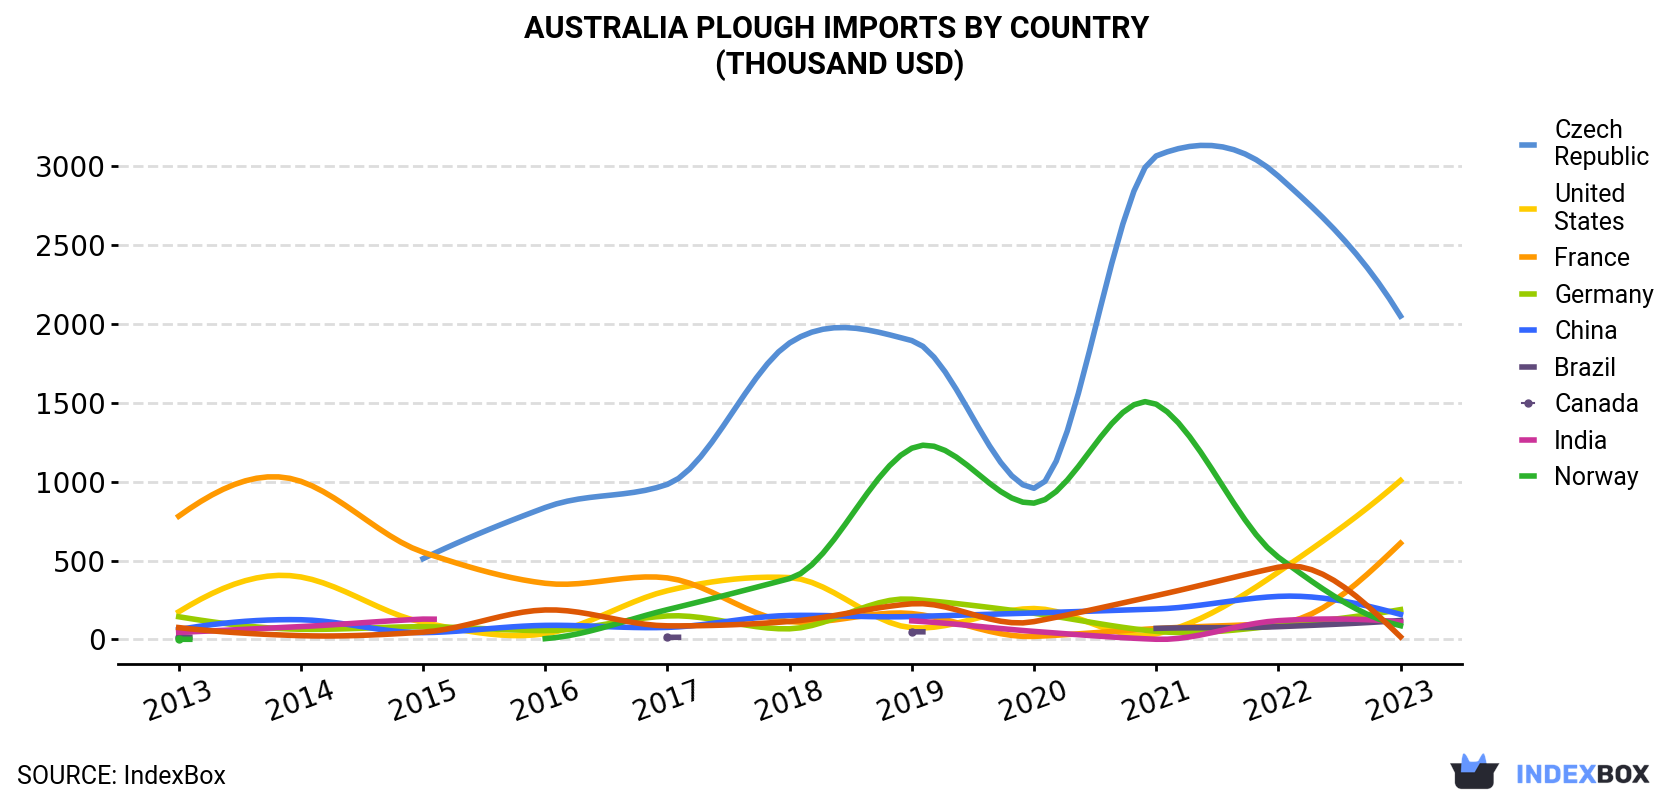 Australia Plough Imports By Country (Thousand USD)